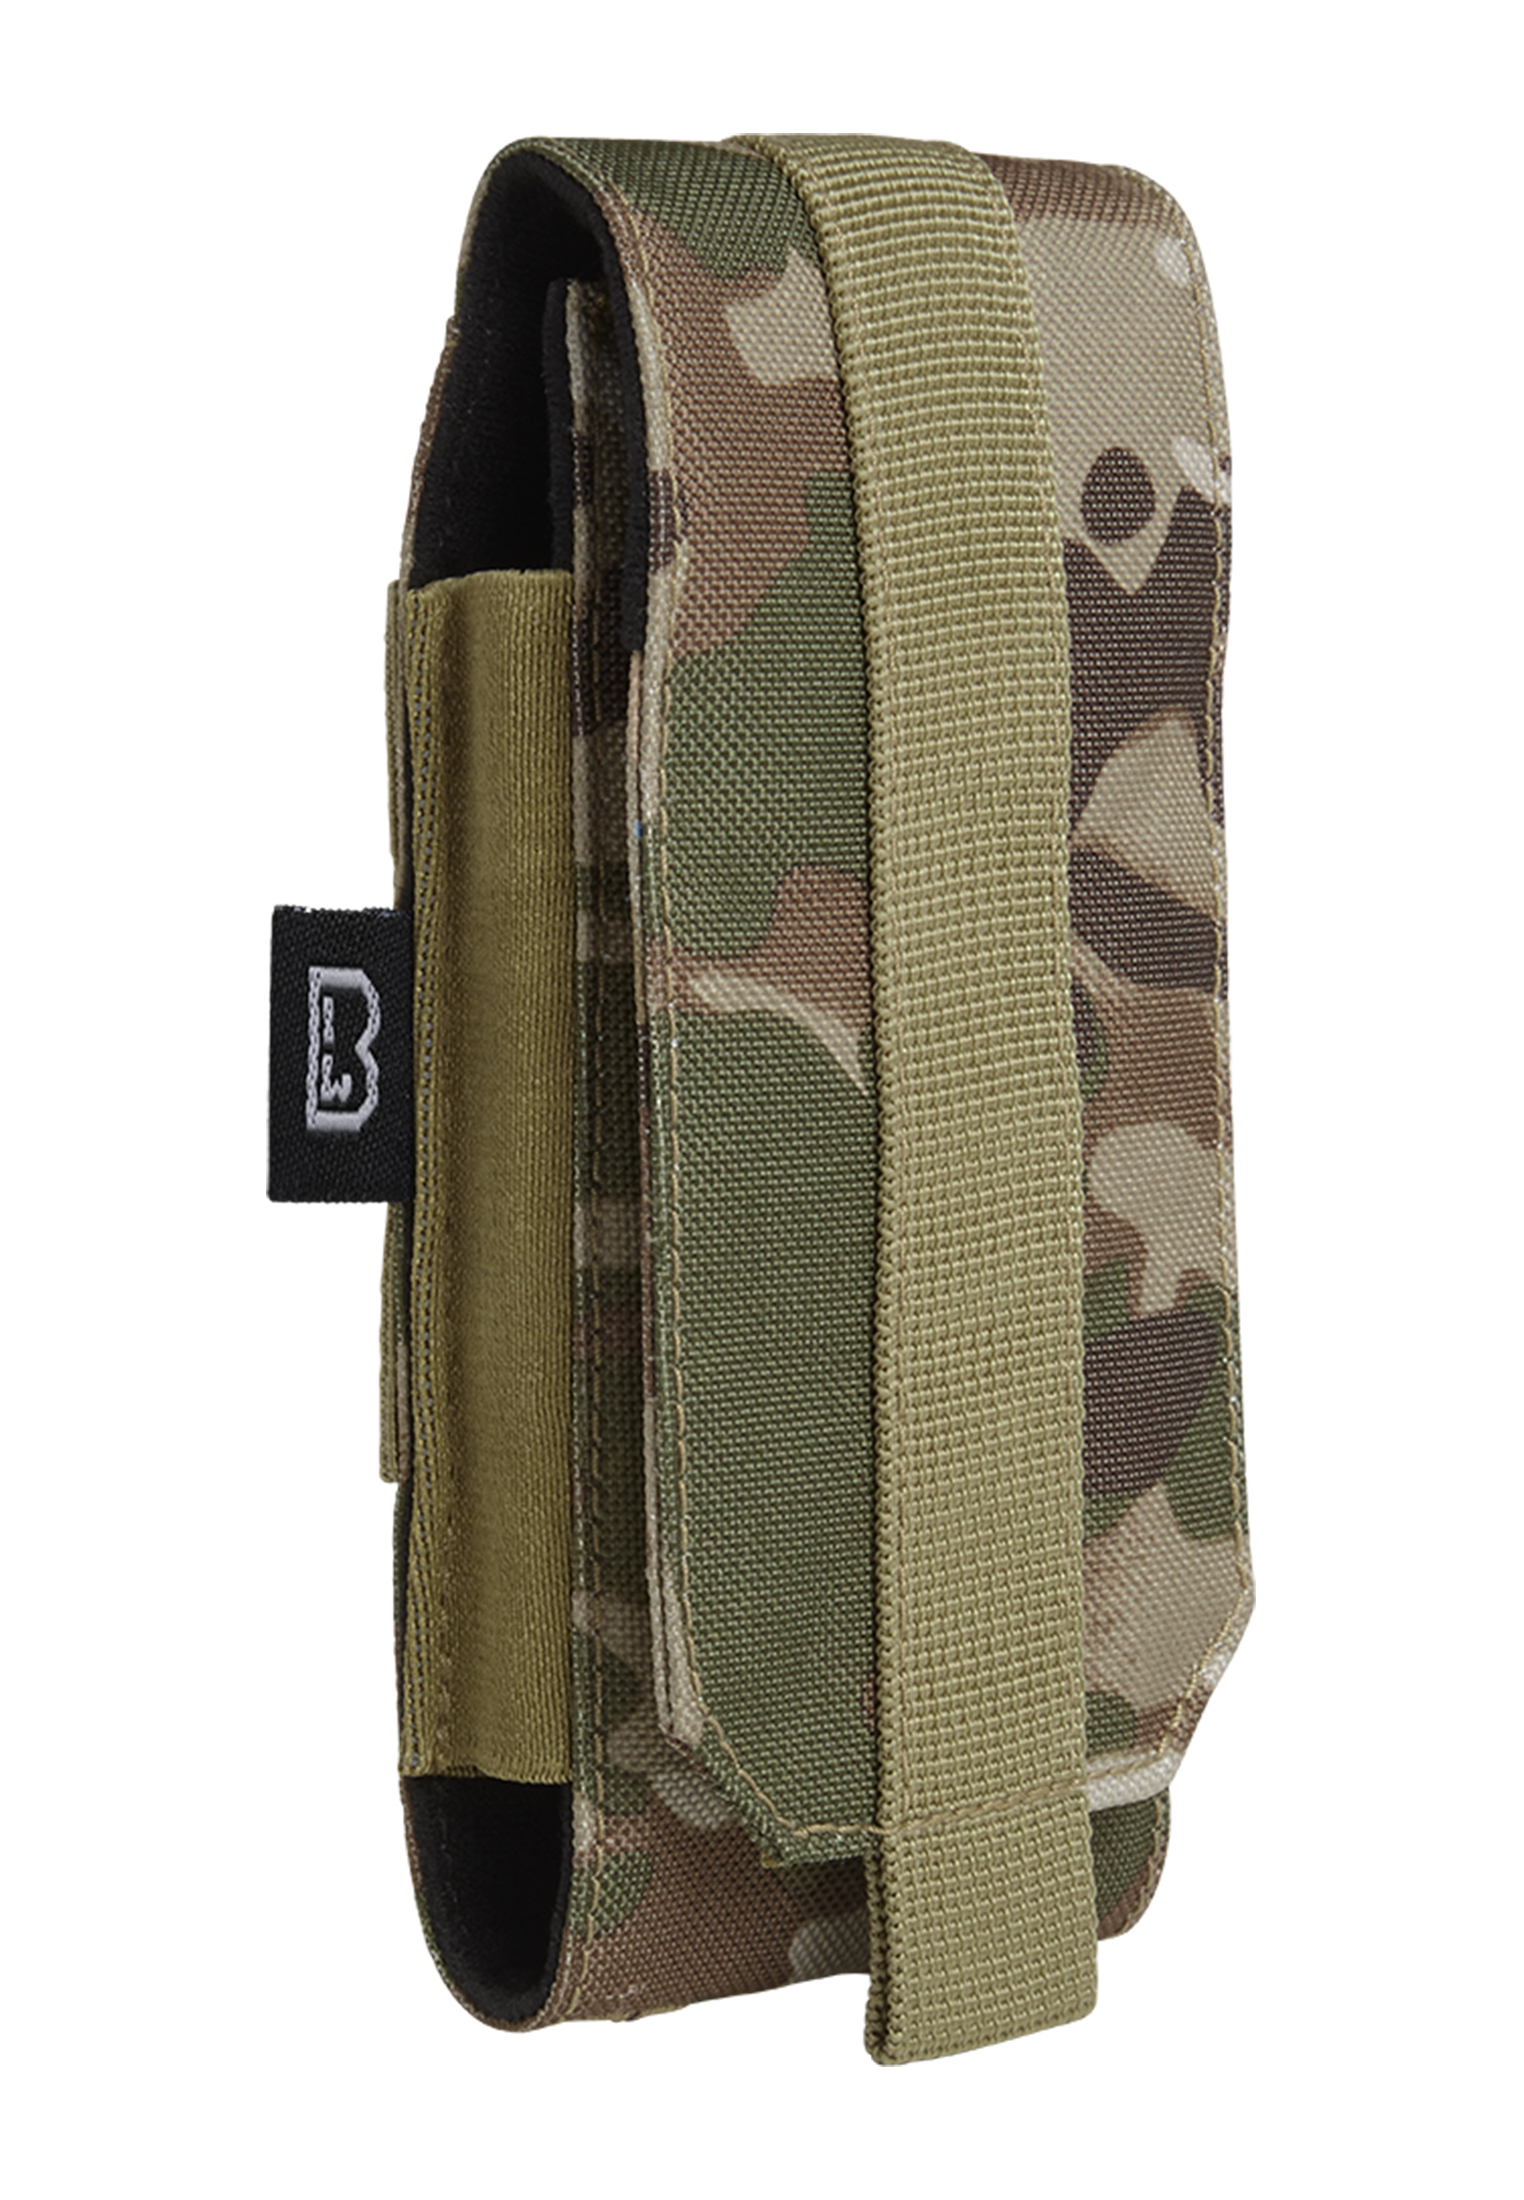 Large Tactical Camouflage Molle Phone Pouch